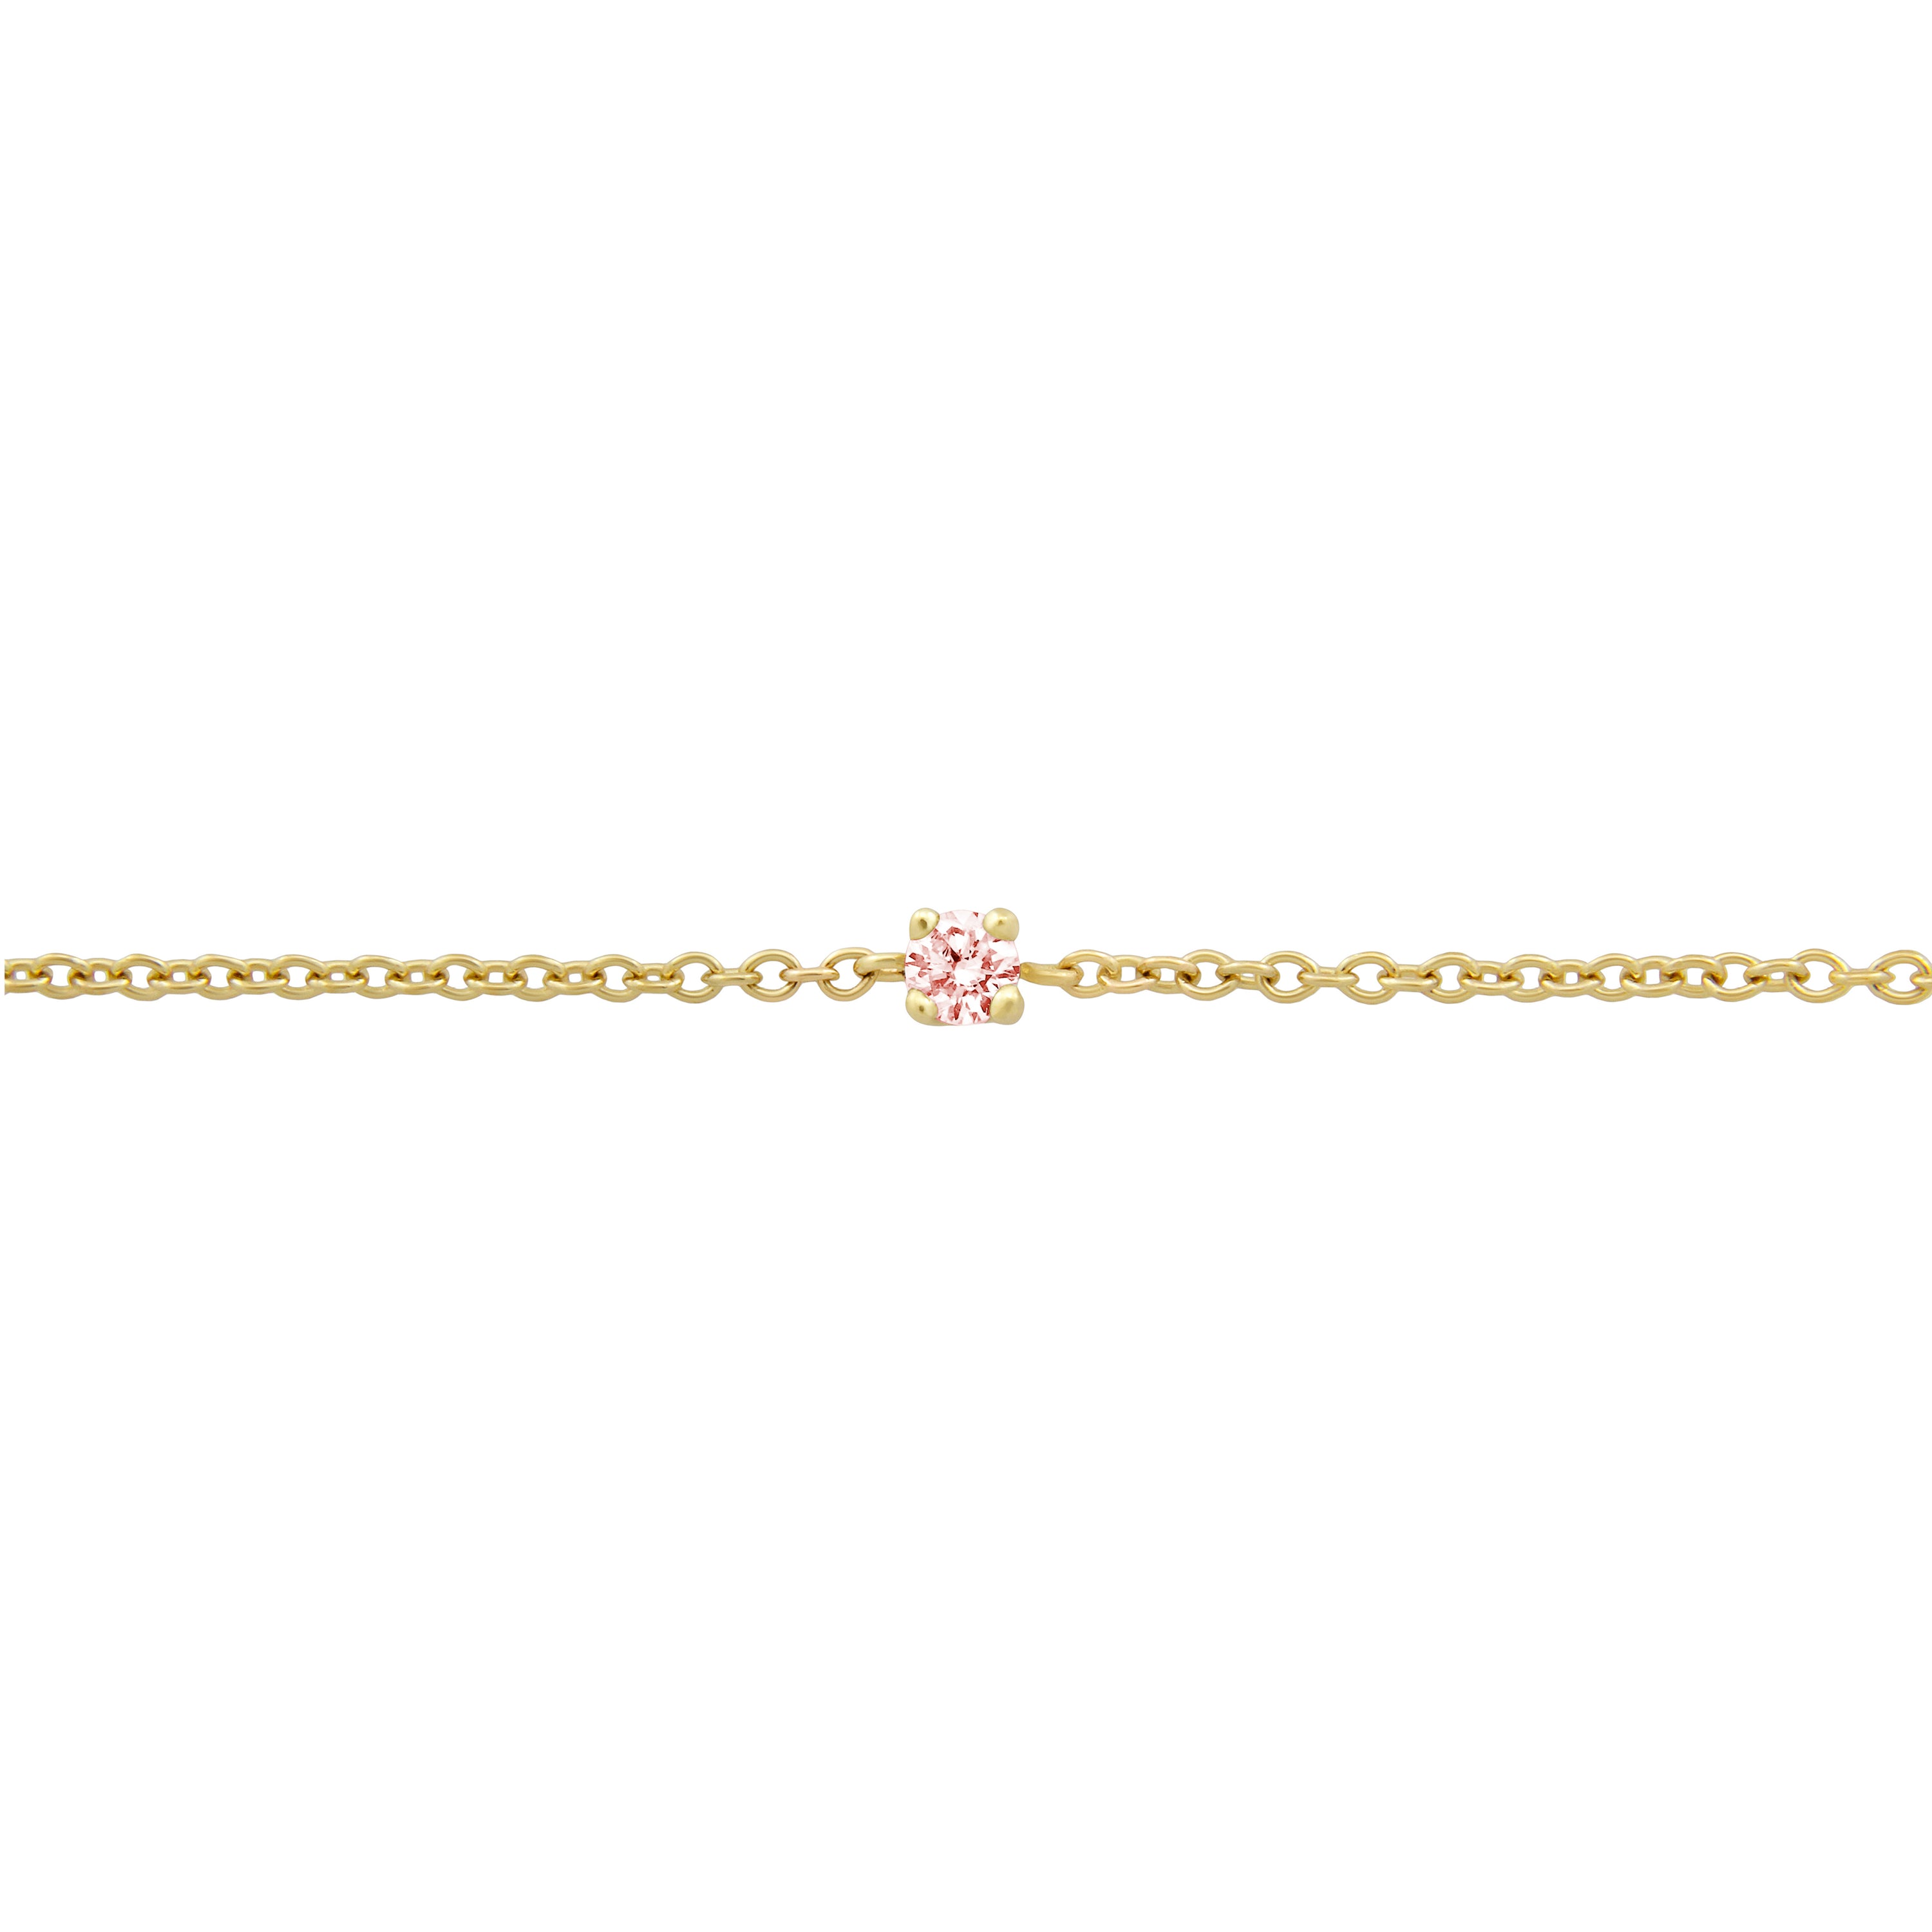 BONDED PINK DIAMOND-SET CABLE CHAIN, 9k Yellow Gold